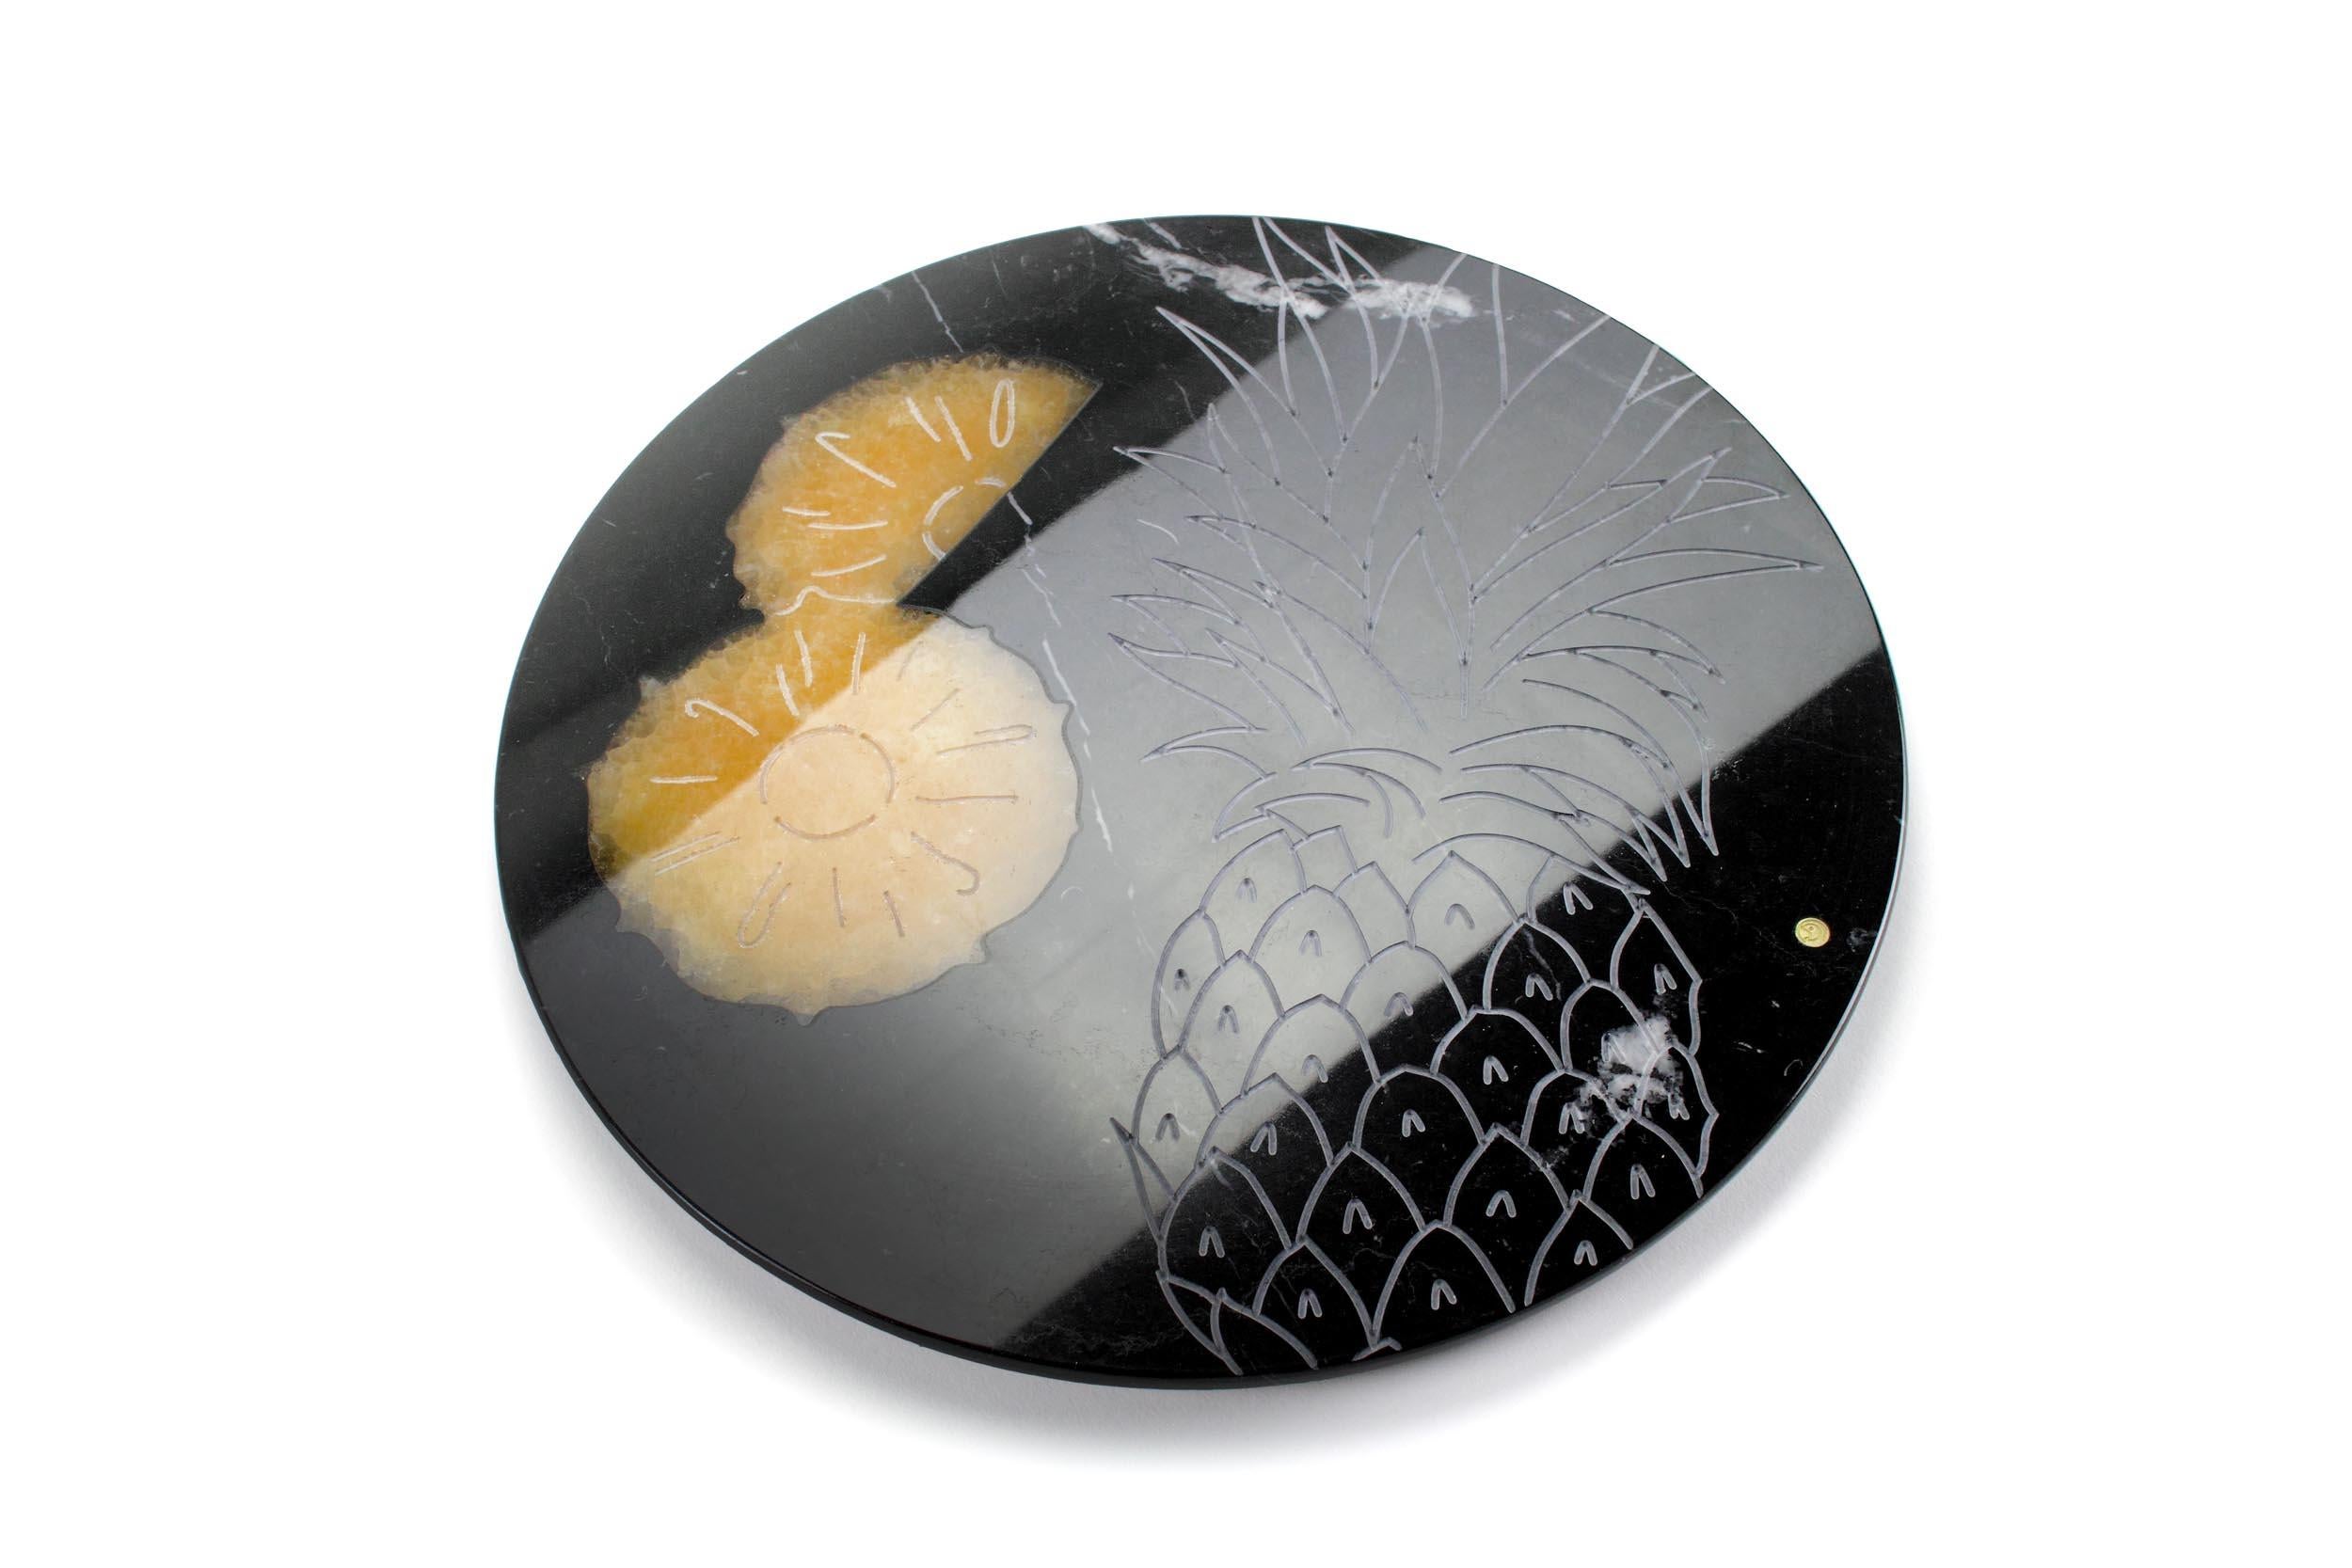 Centerpiece/serving plate in Marquina marble with honey onyx inlay.

Dimensions: D 33, H 1.5 cm

100% Hand made in Italy. 

Marble is a natural material, every piece is unique as each marble block is different in veins and color shades. All of our